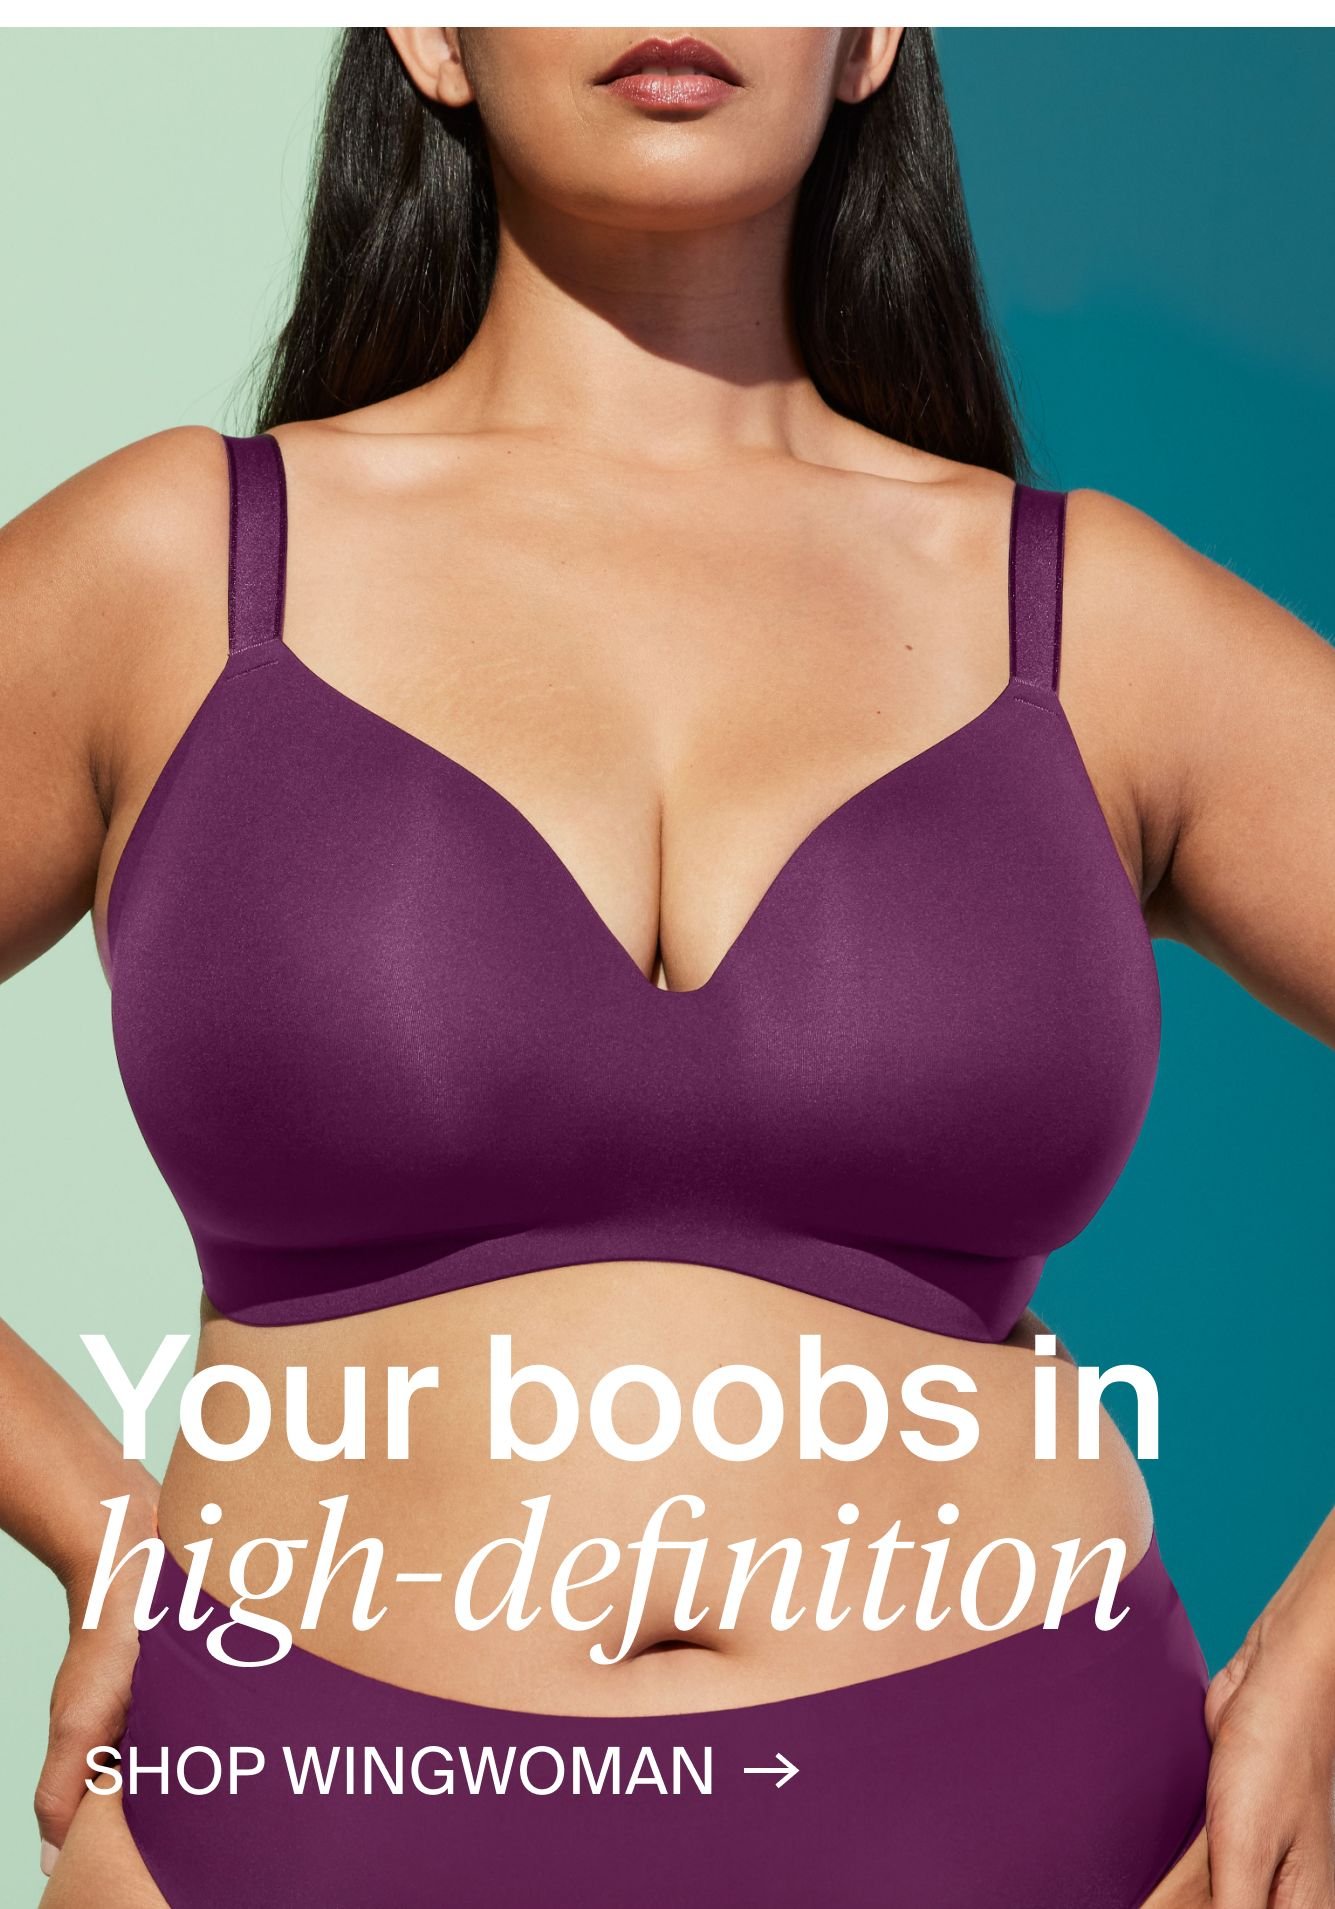 Knix CA: This bra knows all your curves & edges